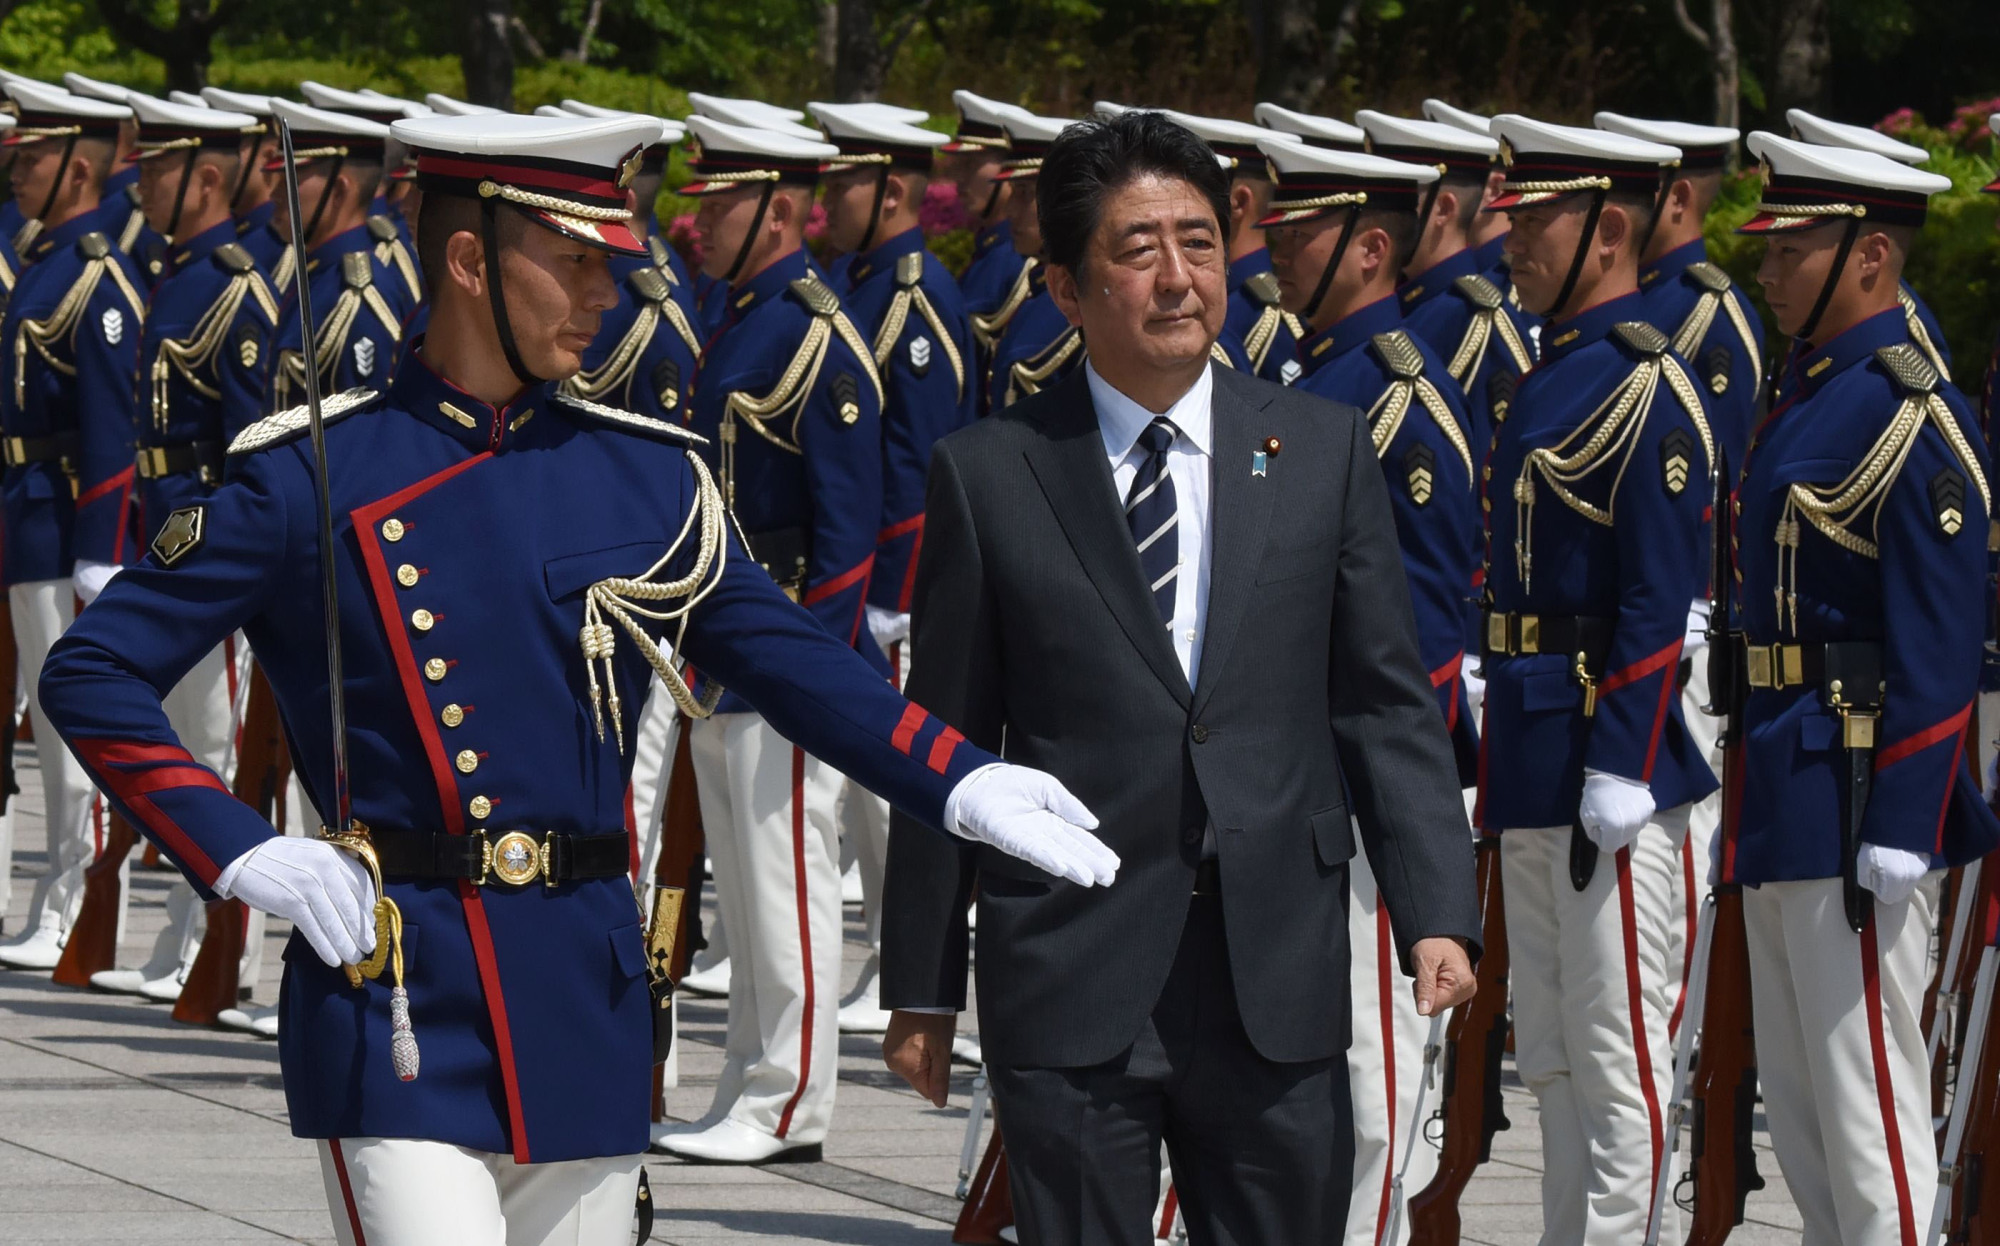 Prime Minister Shinzo Abe, shown reviewing an honor guard at a Tuesday ceremony to mark the return of SDF peacekeepers, is on an ideological mission to reshape the Japanese state. | AFP-JIJI